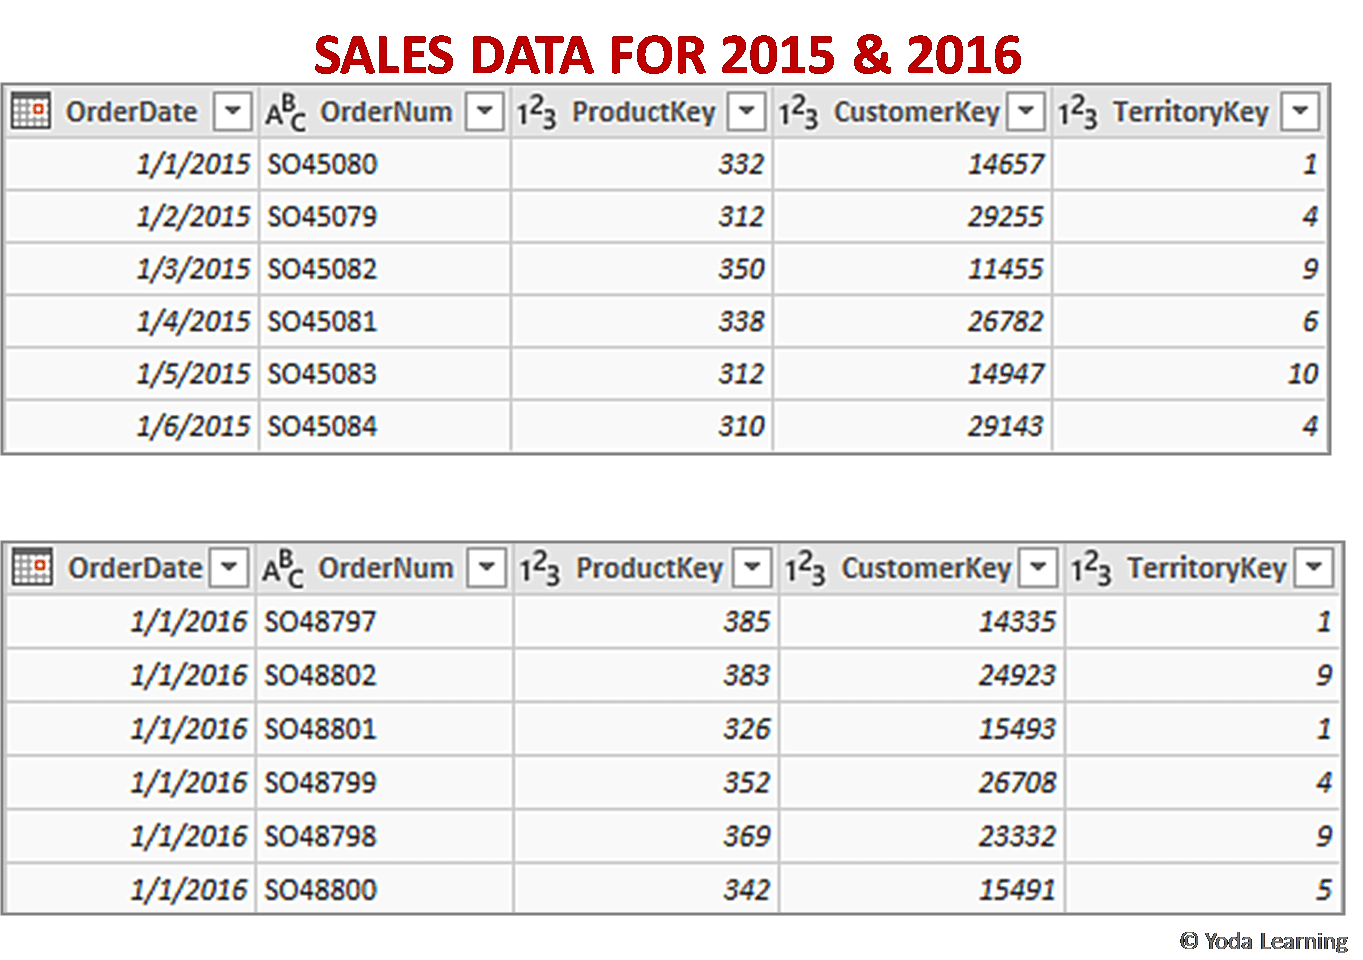 SALES DATA FOR 2015 & 2016